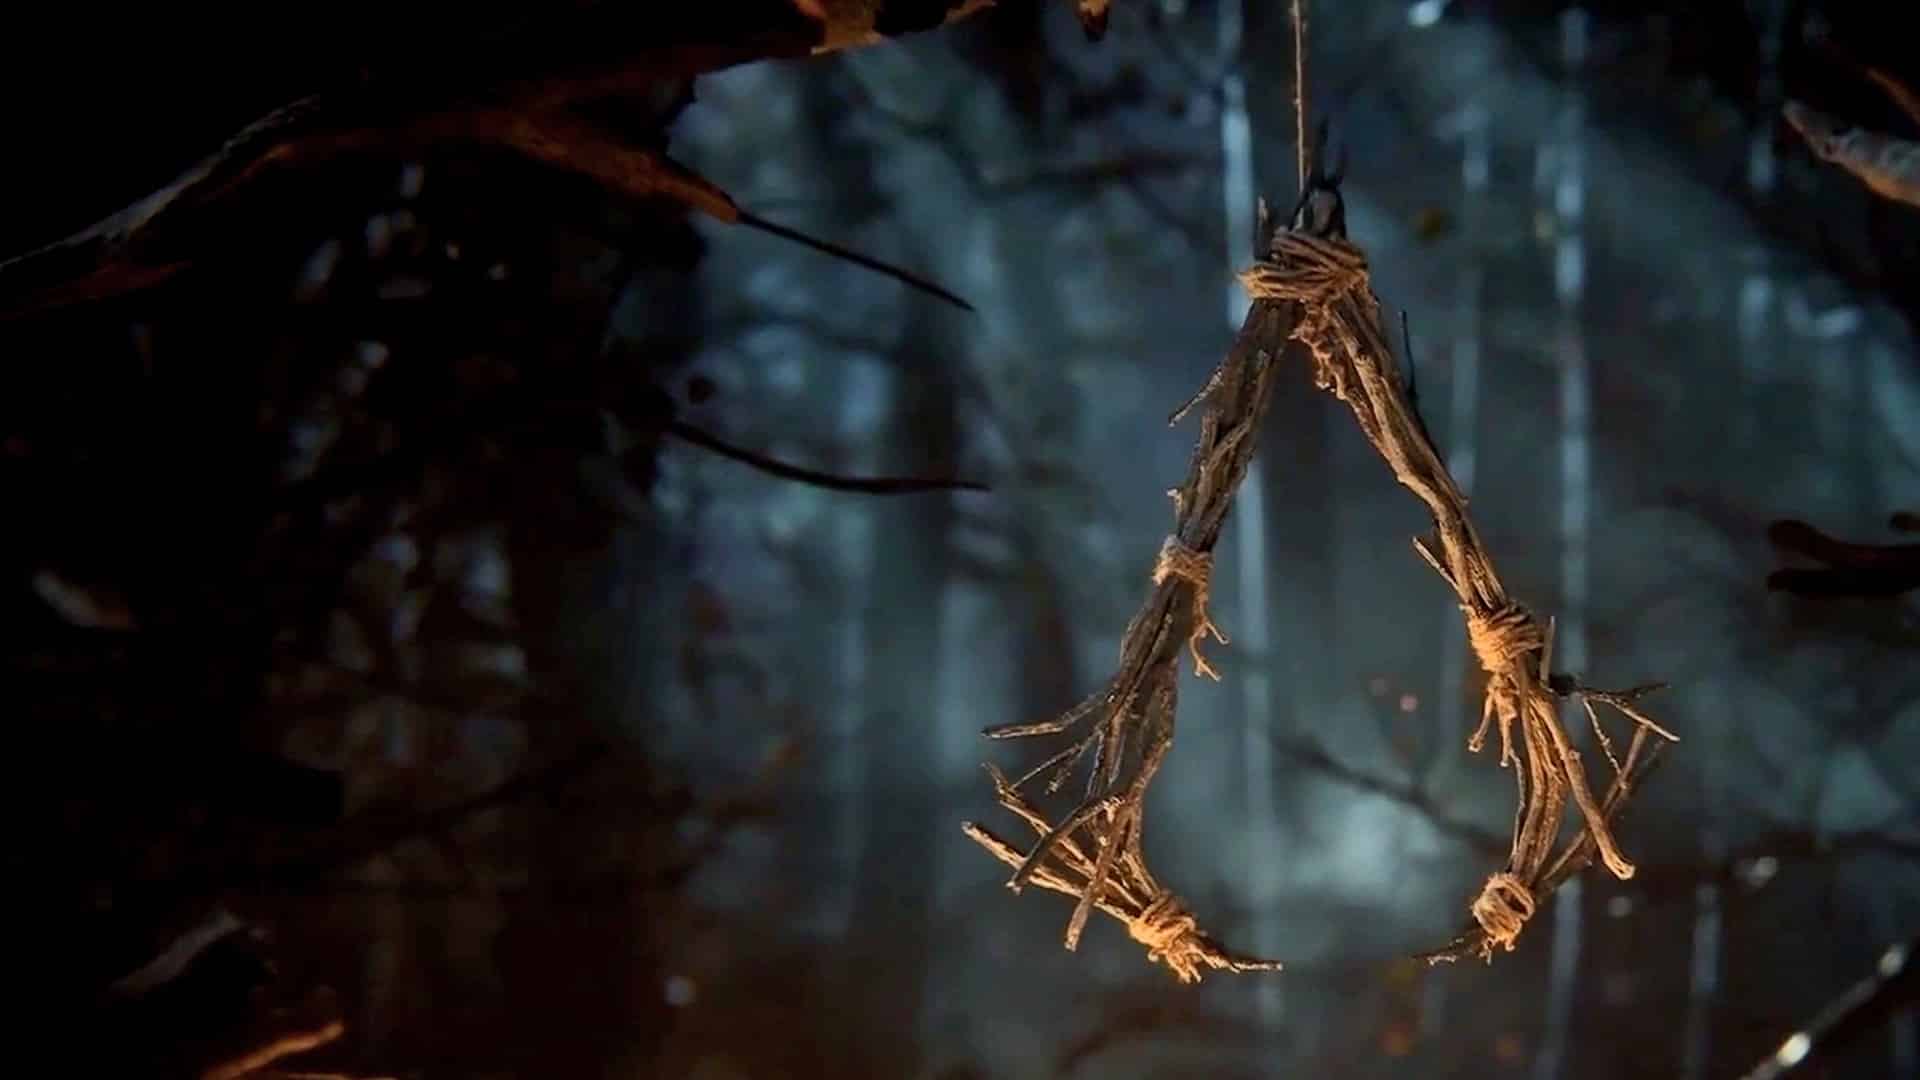 (The Assassin logo, made from twigs, immediately evokes memories of talismans and totems hung to keep evil away).